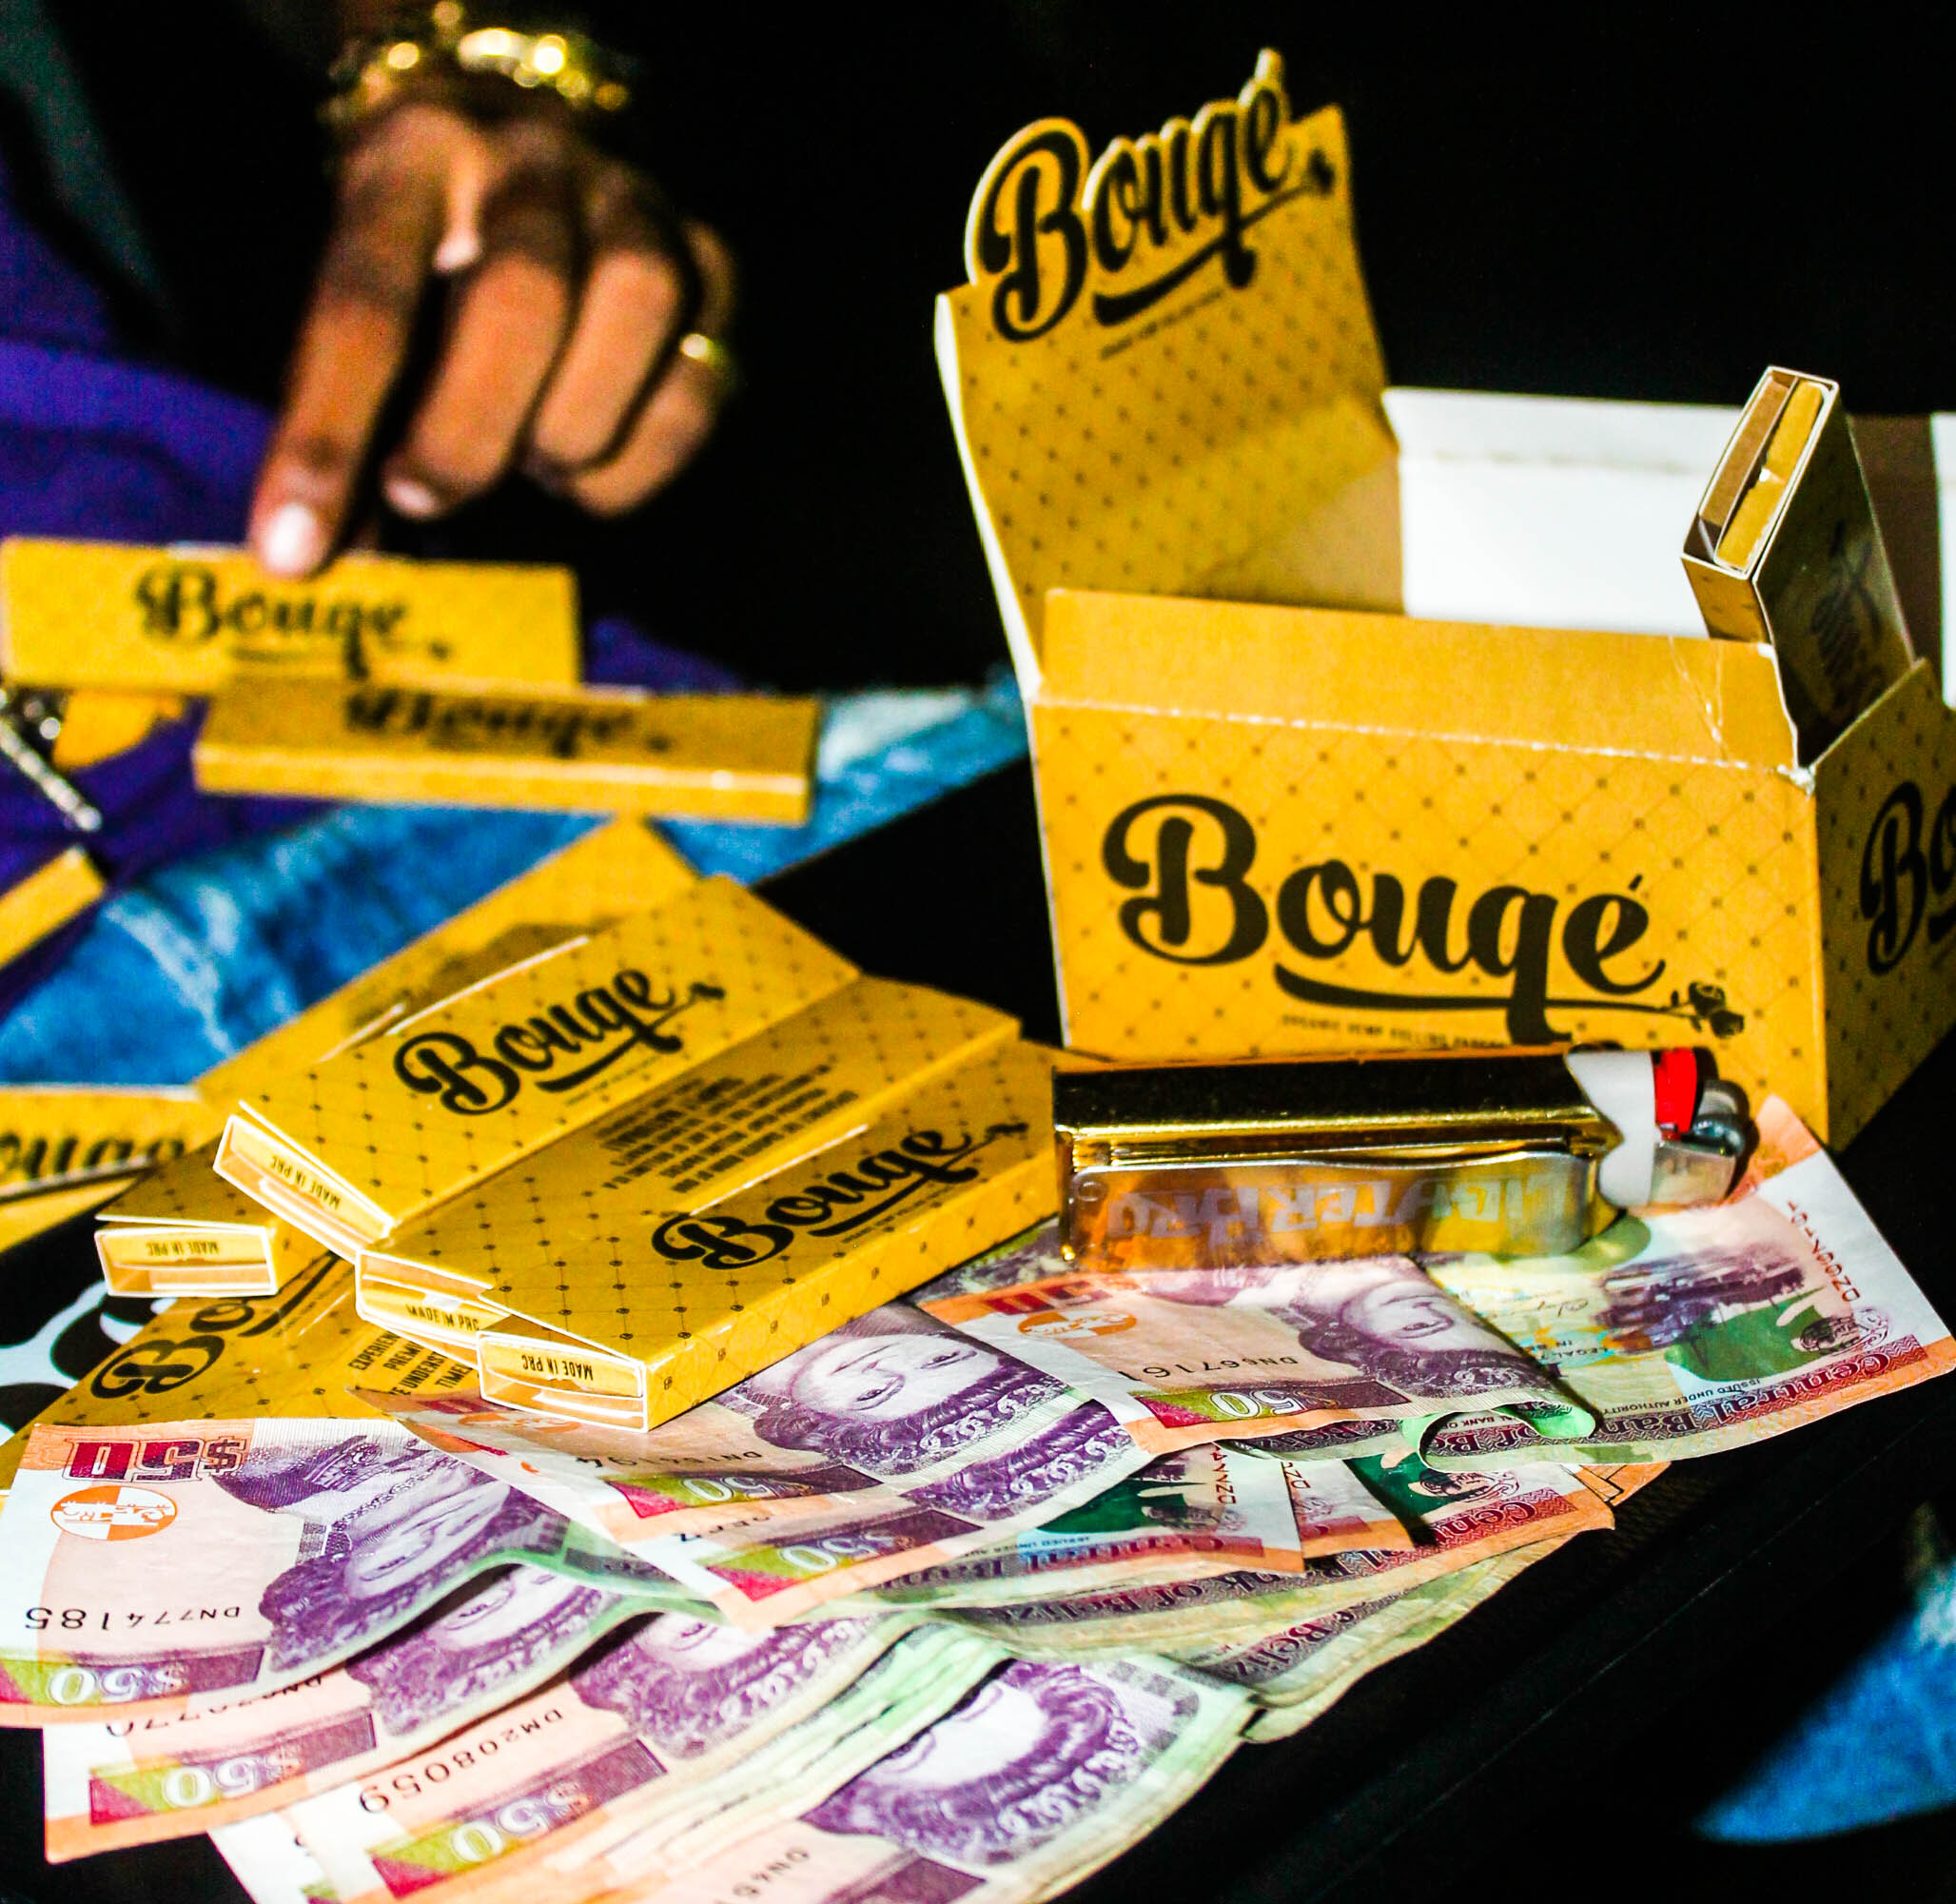 Bouqe Rolling Papers (16).jpg